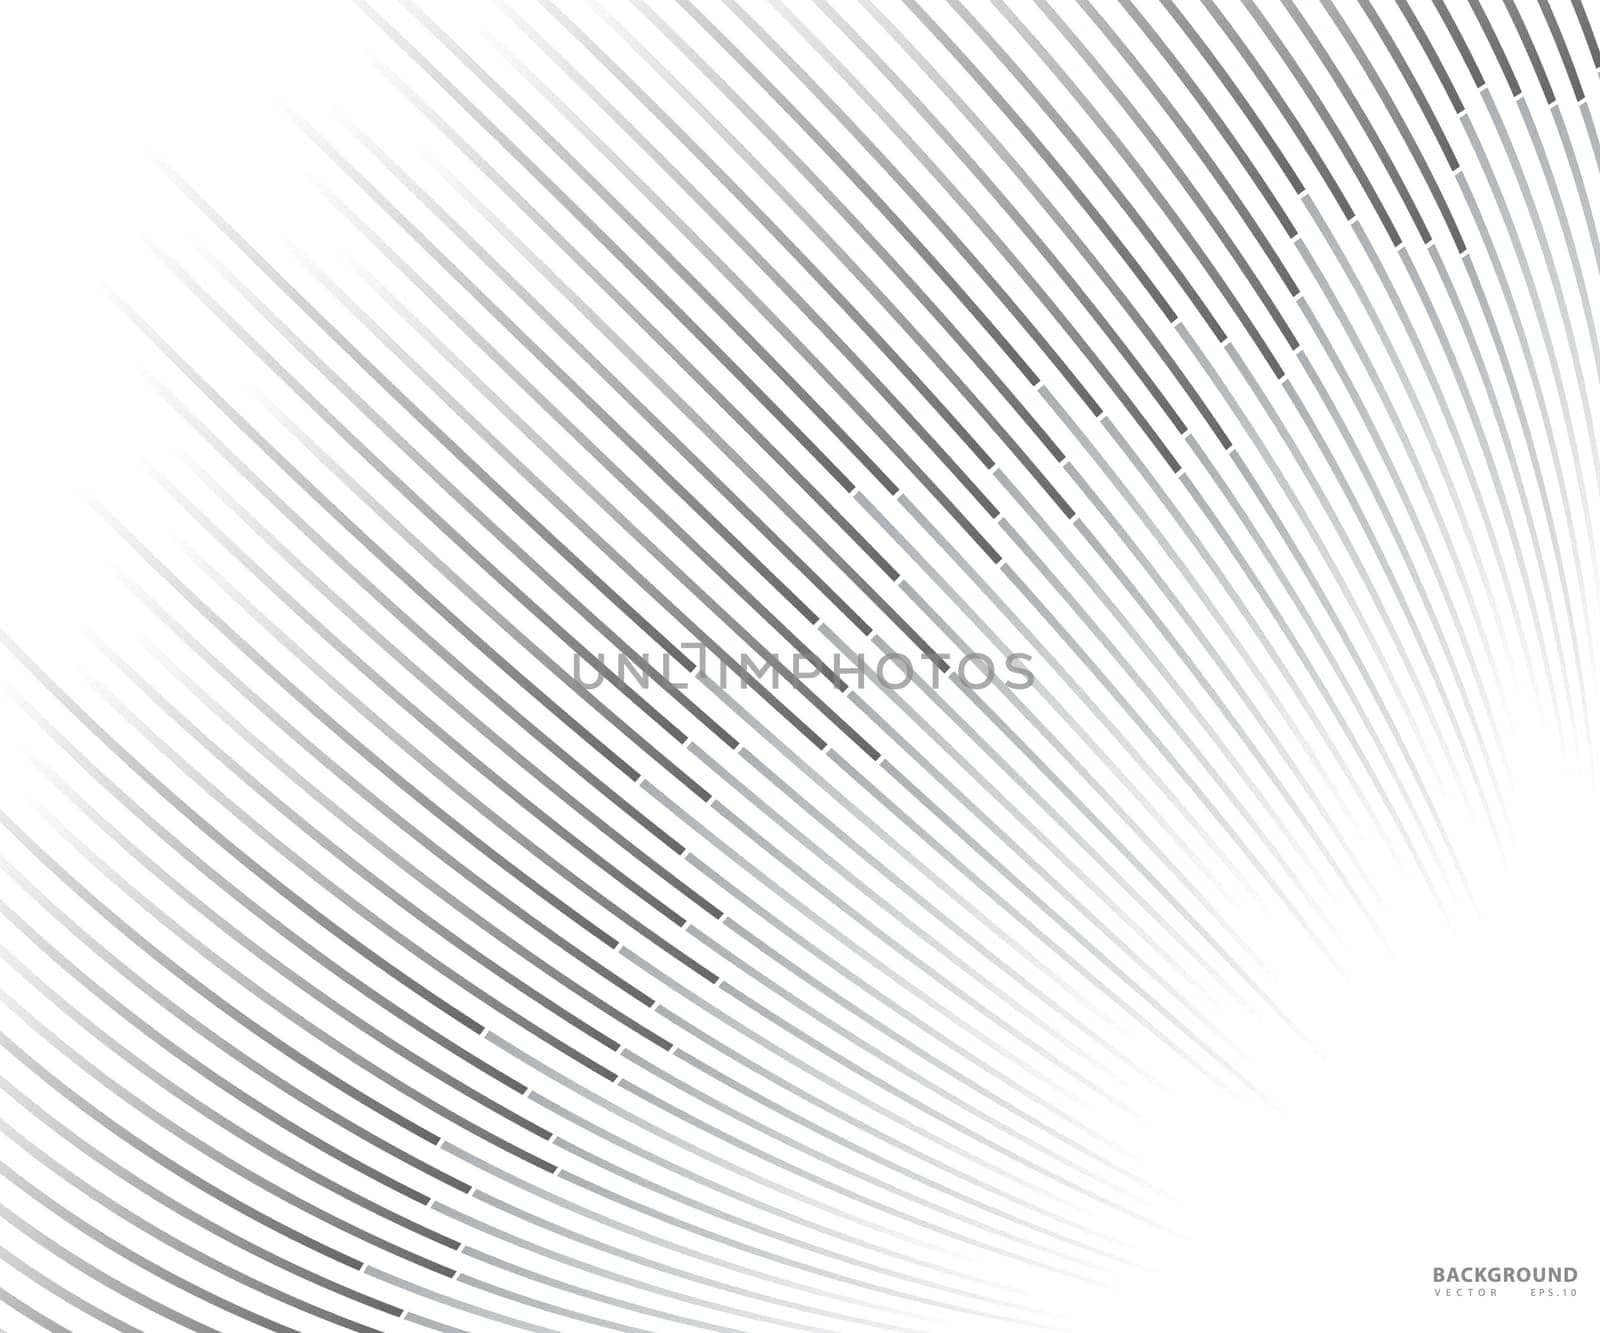 Abstract background, vector template for your ideas, monochromatic lines texture, waved lines texture by Rodseng